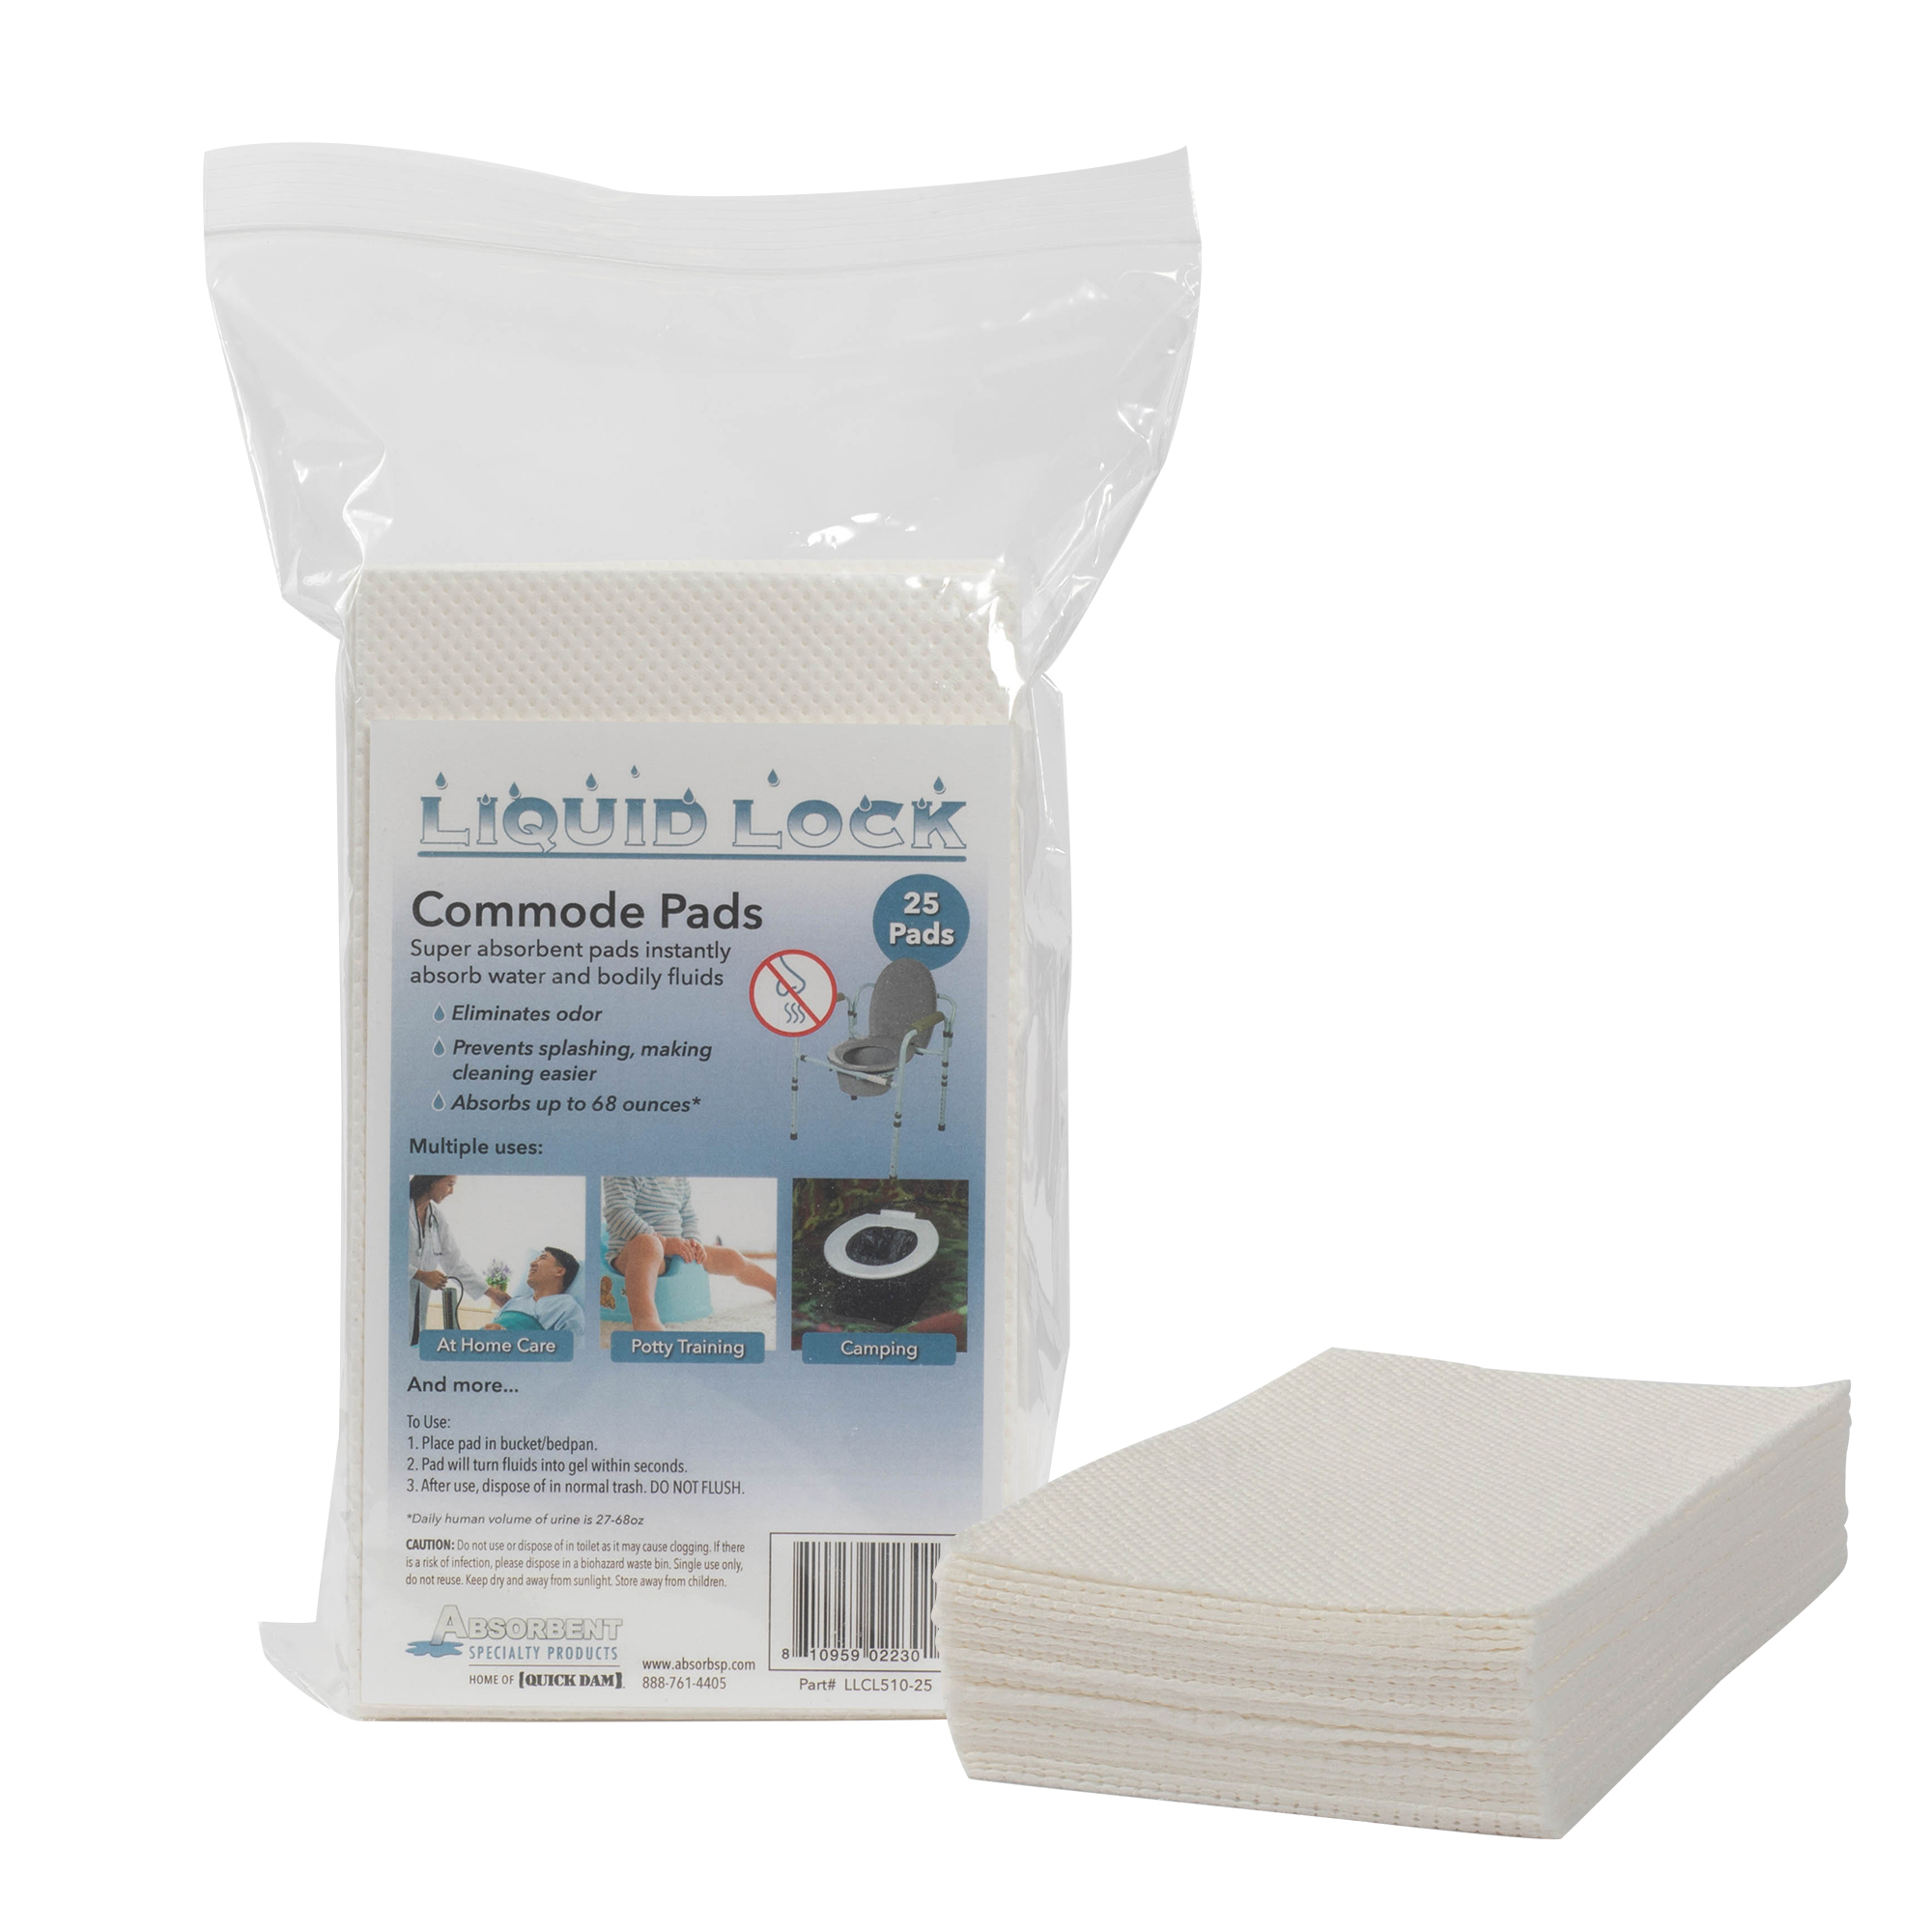 Super Absorbent Liquid Lock Commode Pads for Bedside Commodes, Bedpans and Potty Training